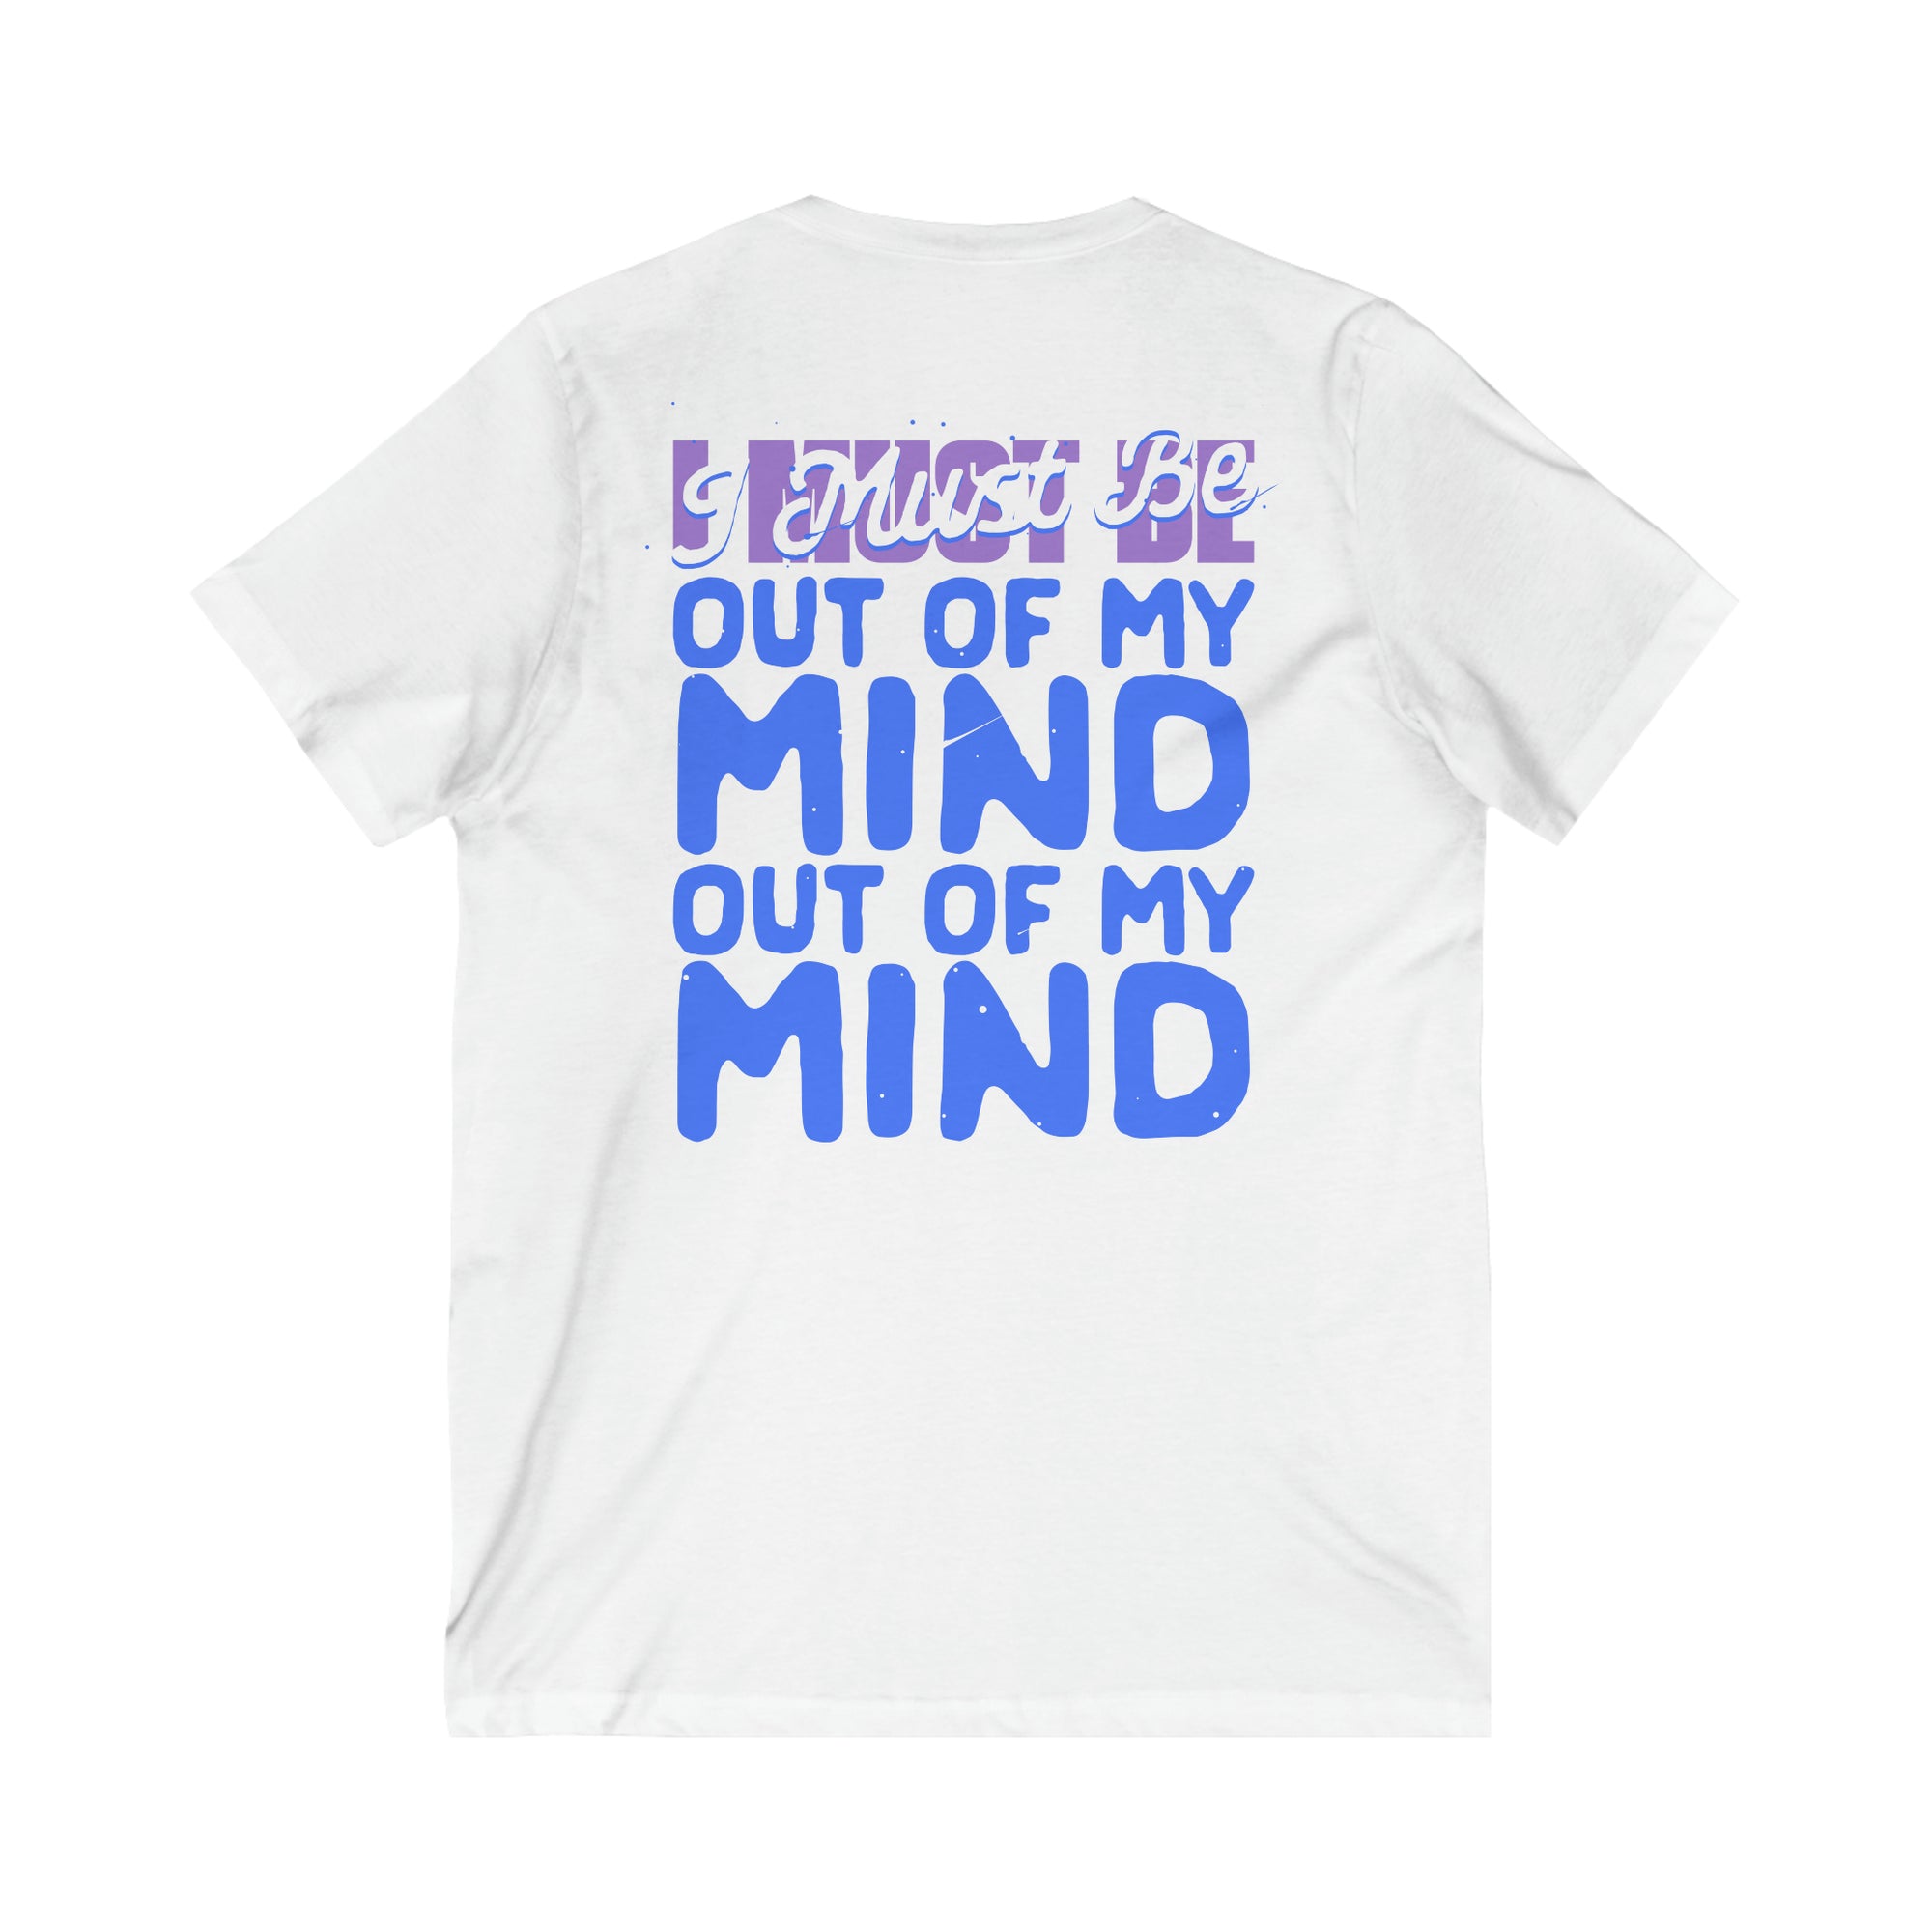 Out Of My Mind V-Neck Tee - Adult